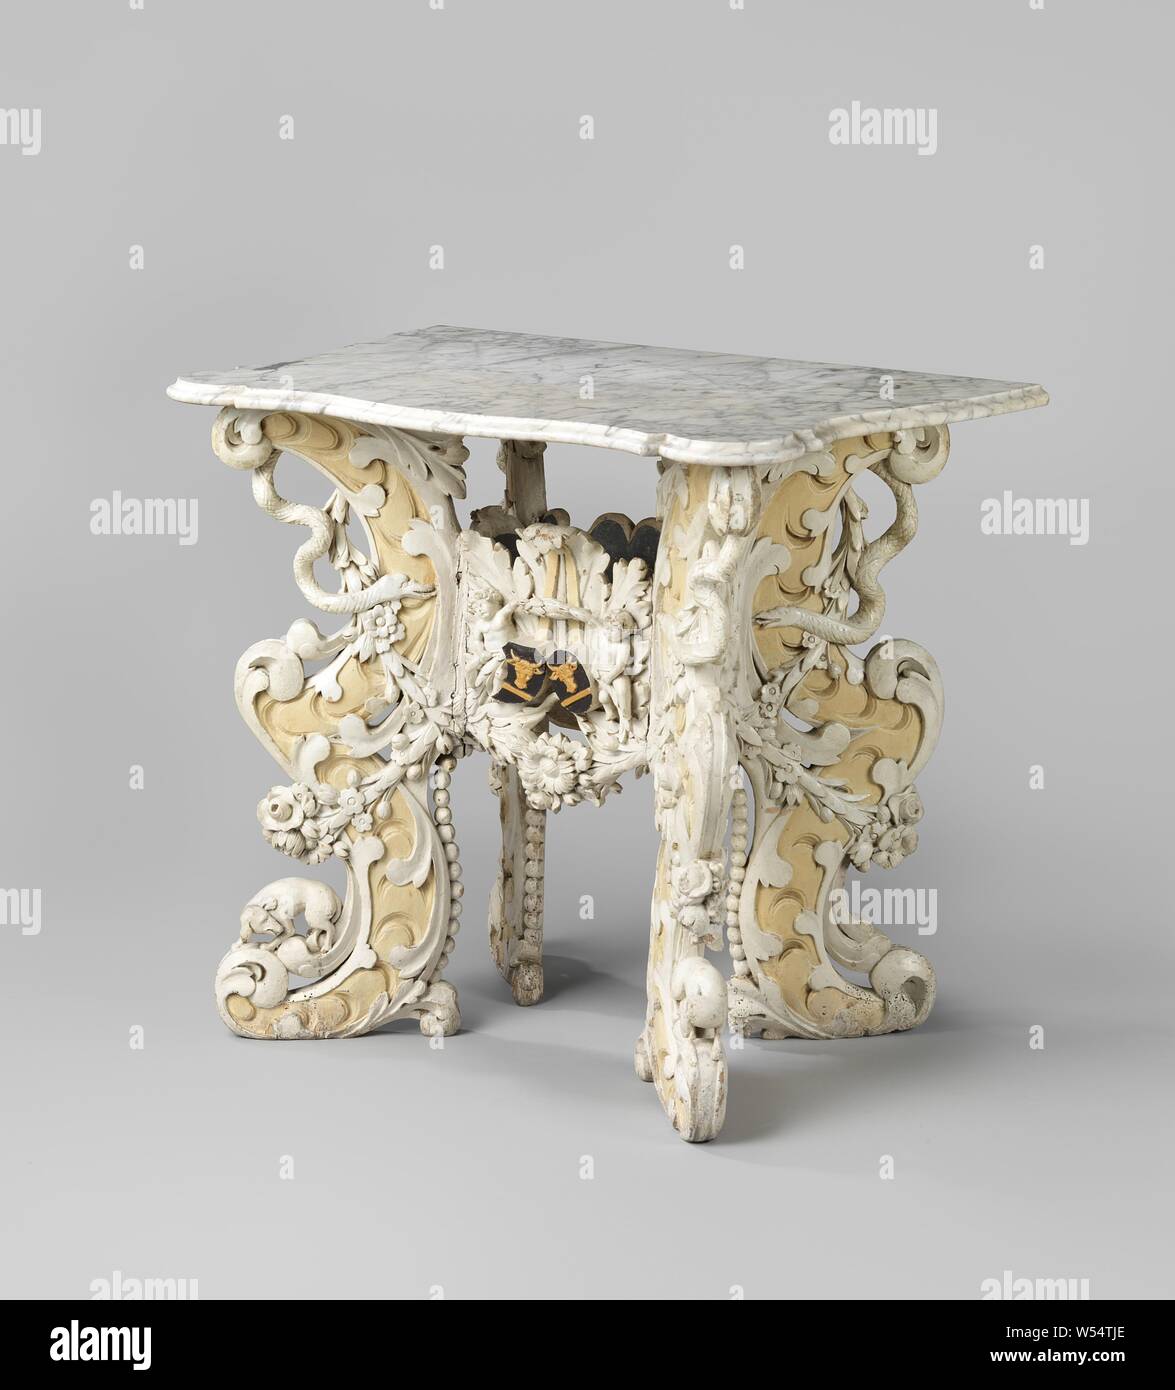 Table top of white painted wood table with four angled legs and carved, Marble table top of white painted lime wood table with four angled legs, made up of two C-volutes placed one above the other., anonymous, Northern Netherlands, 1650 - 1700, marble (rock), w 82 cm × d 52 cm × h 3 cm × w 27 kg Stock Photo